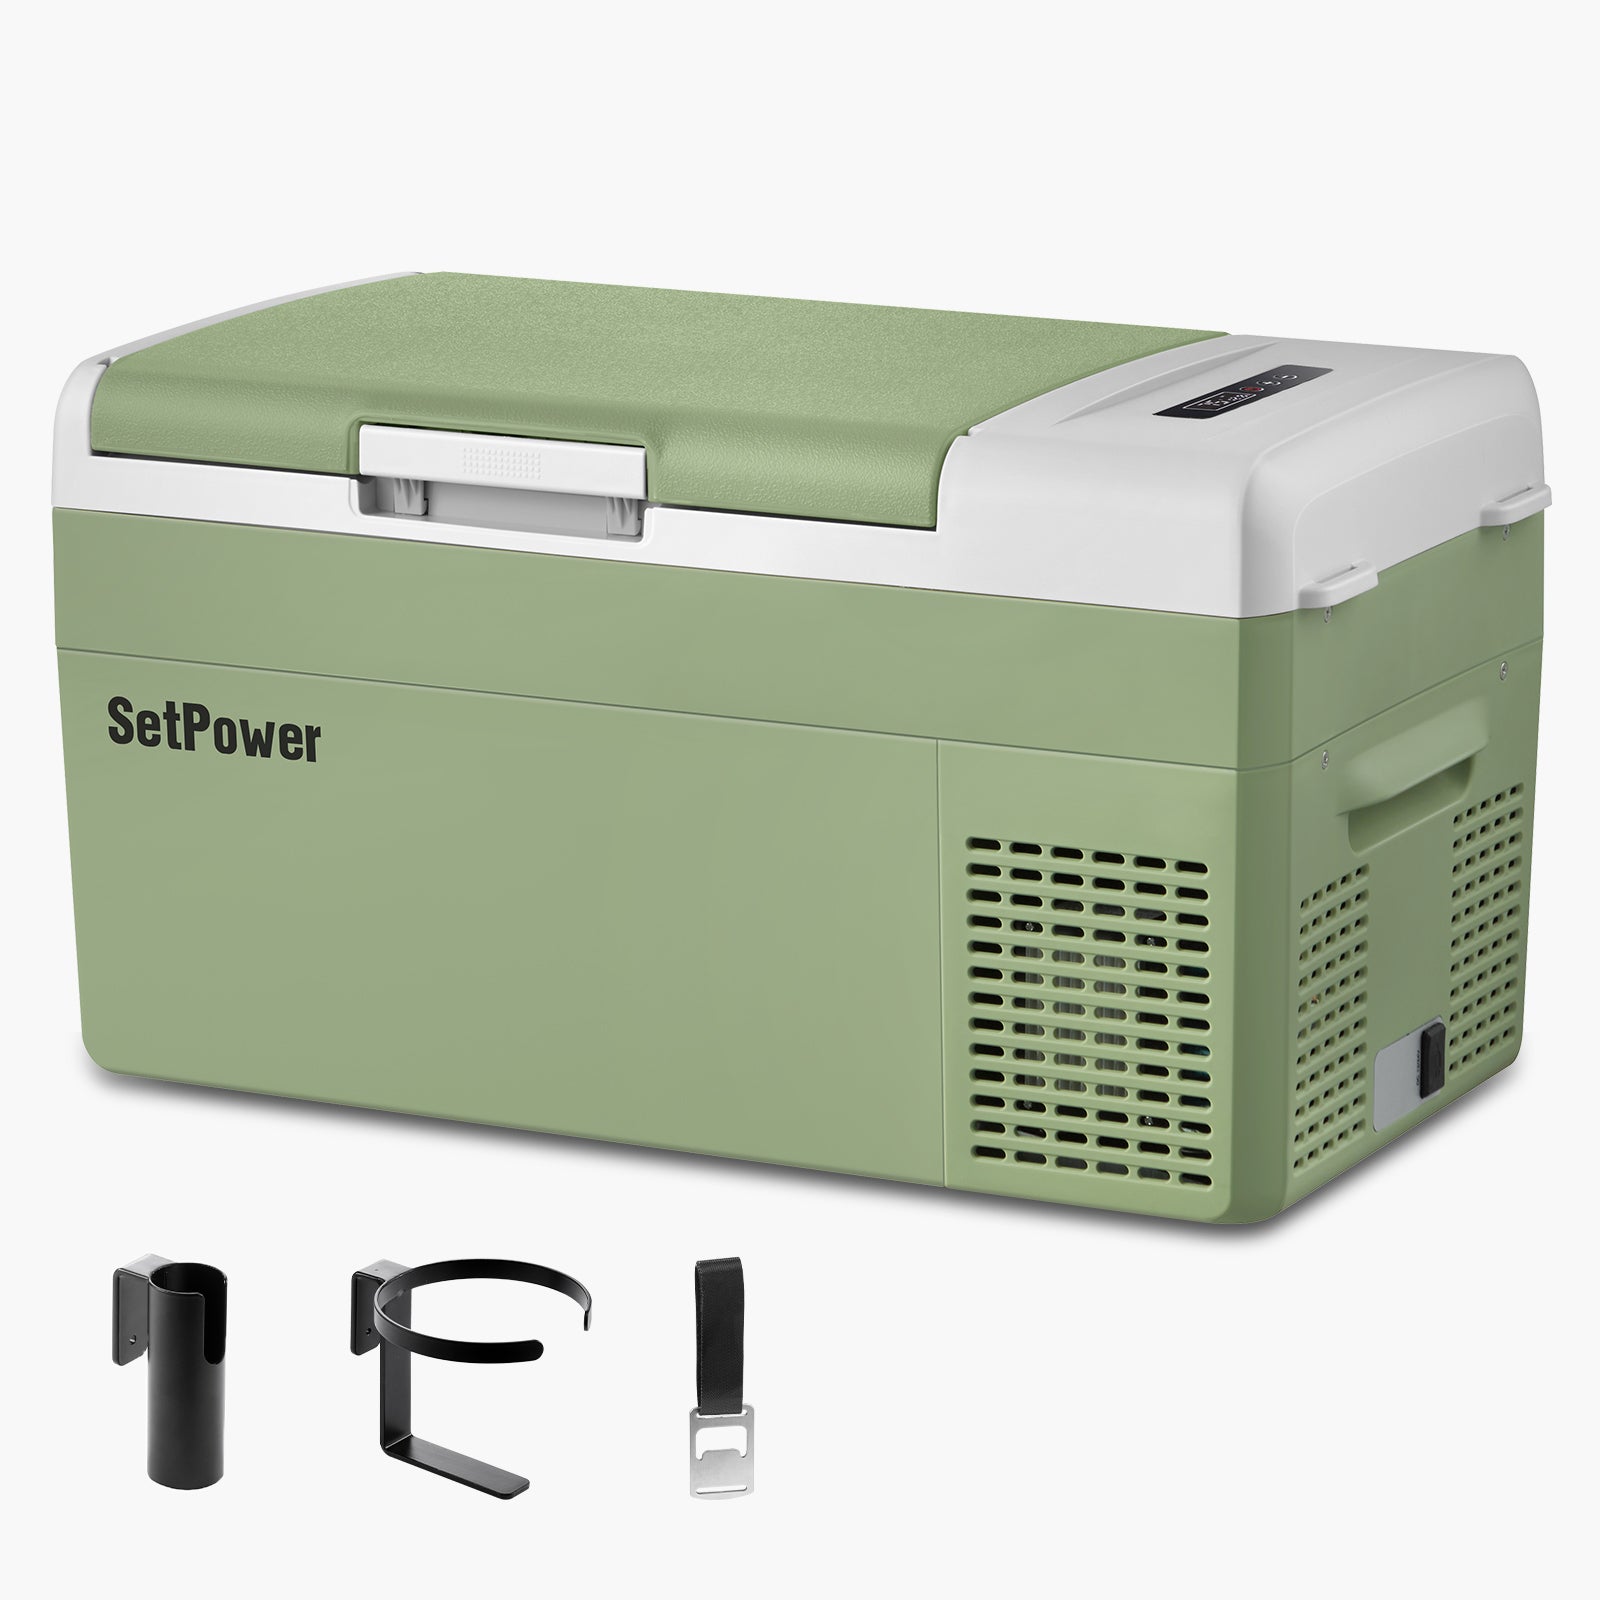 Setpower 15.8Qt FC15 Portable 12V Car Refrigerator With 3 Free Gifts - $119 Only